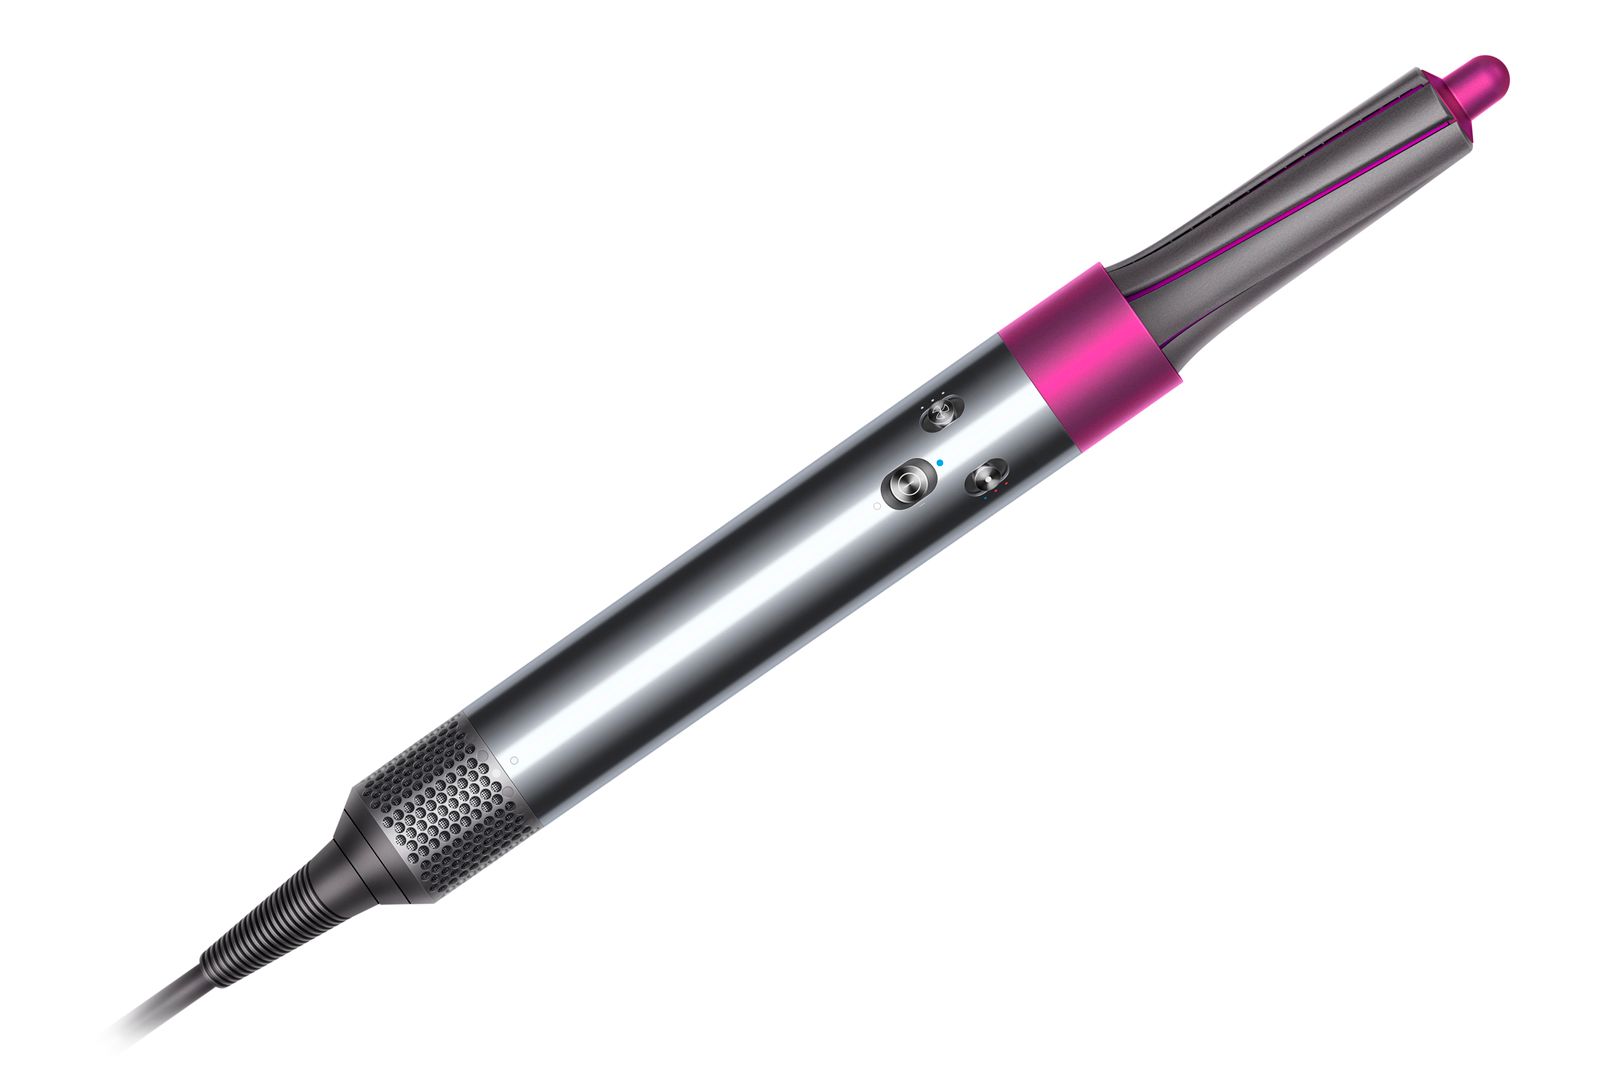 Dysons New Airwrap Super Styler Is A Styling Tool For Curls Waves And Blow Dries image 1